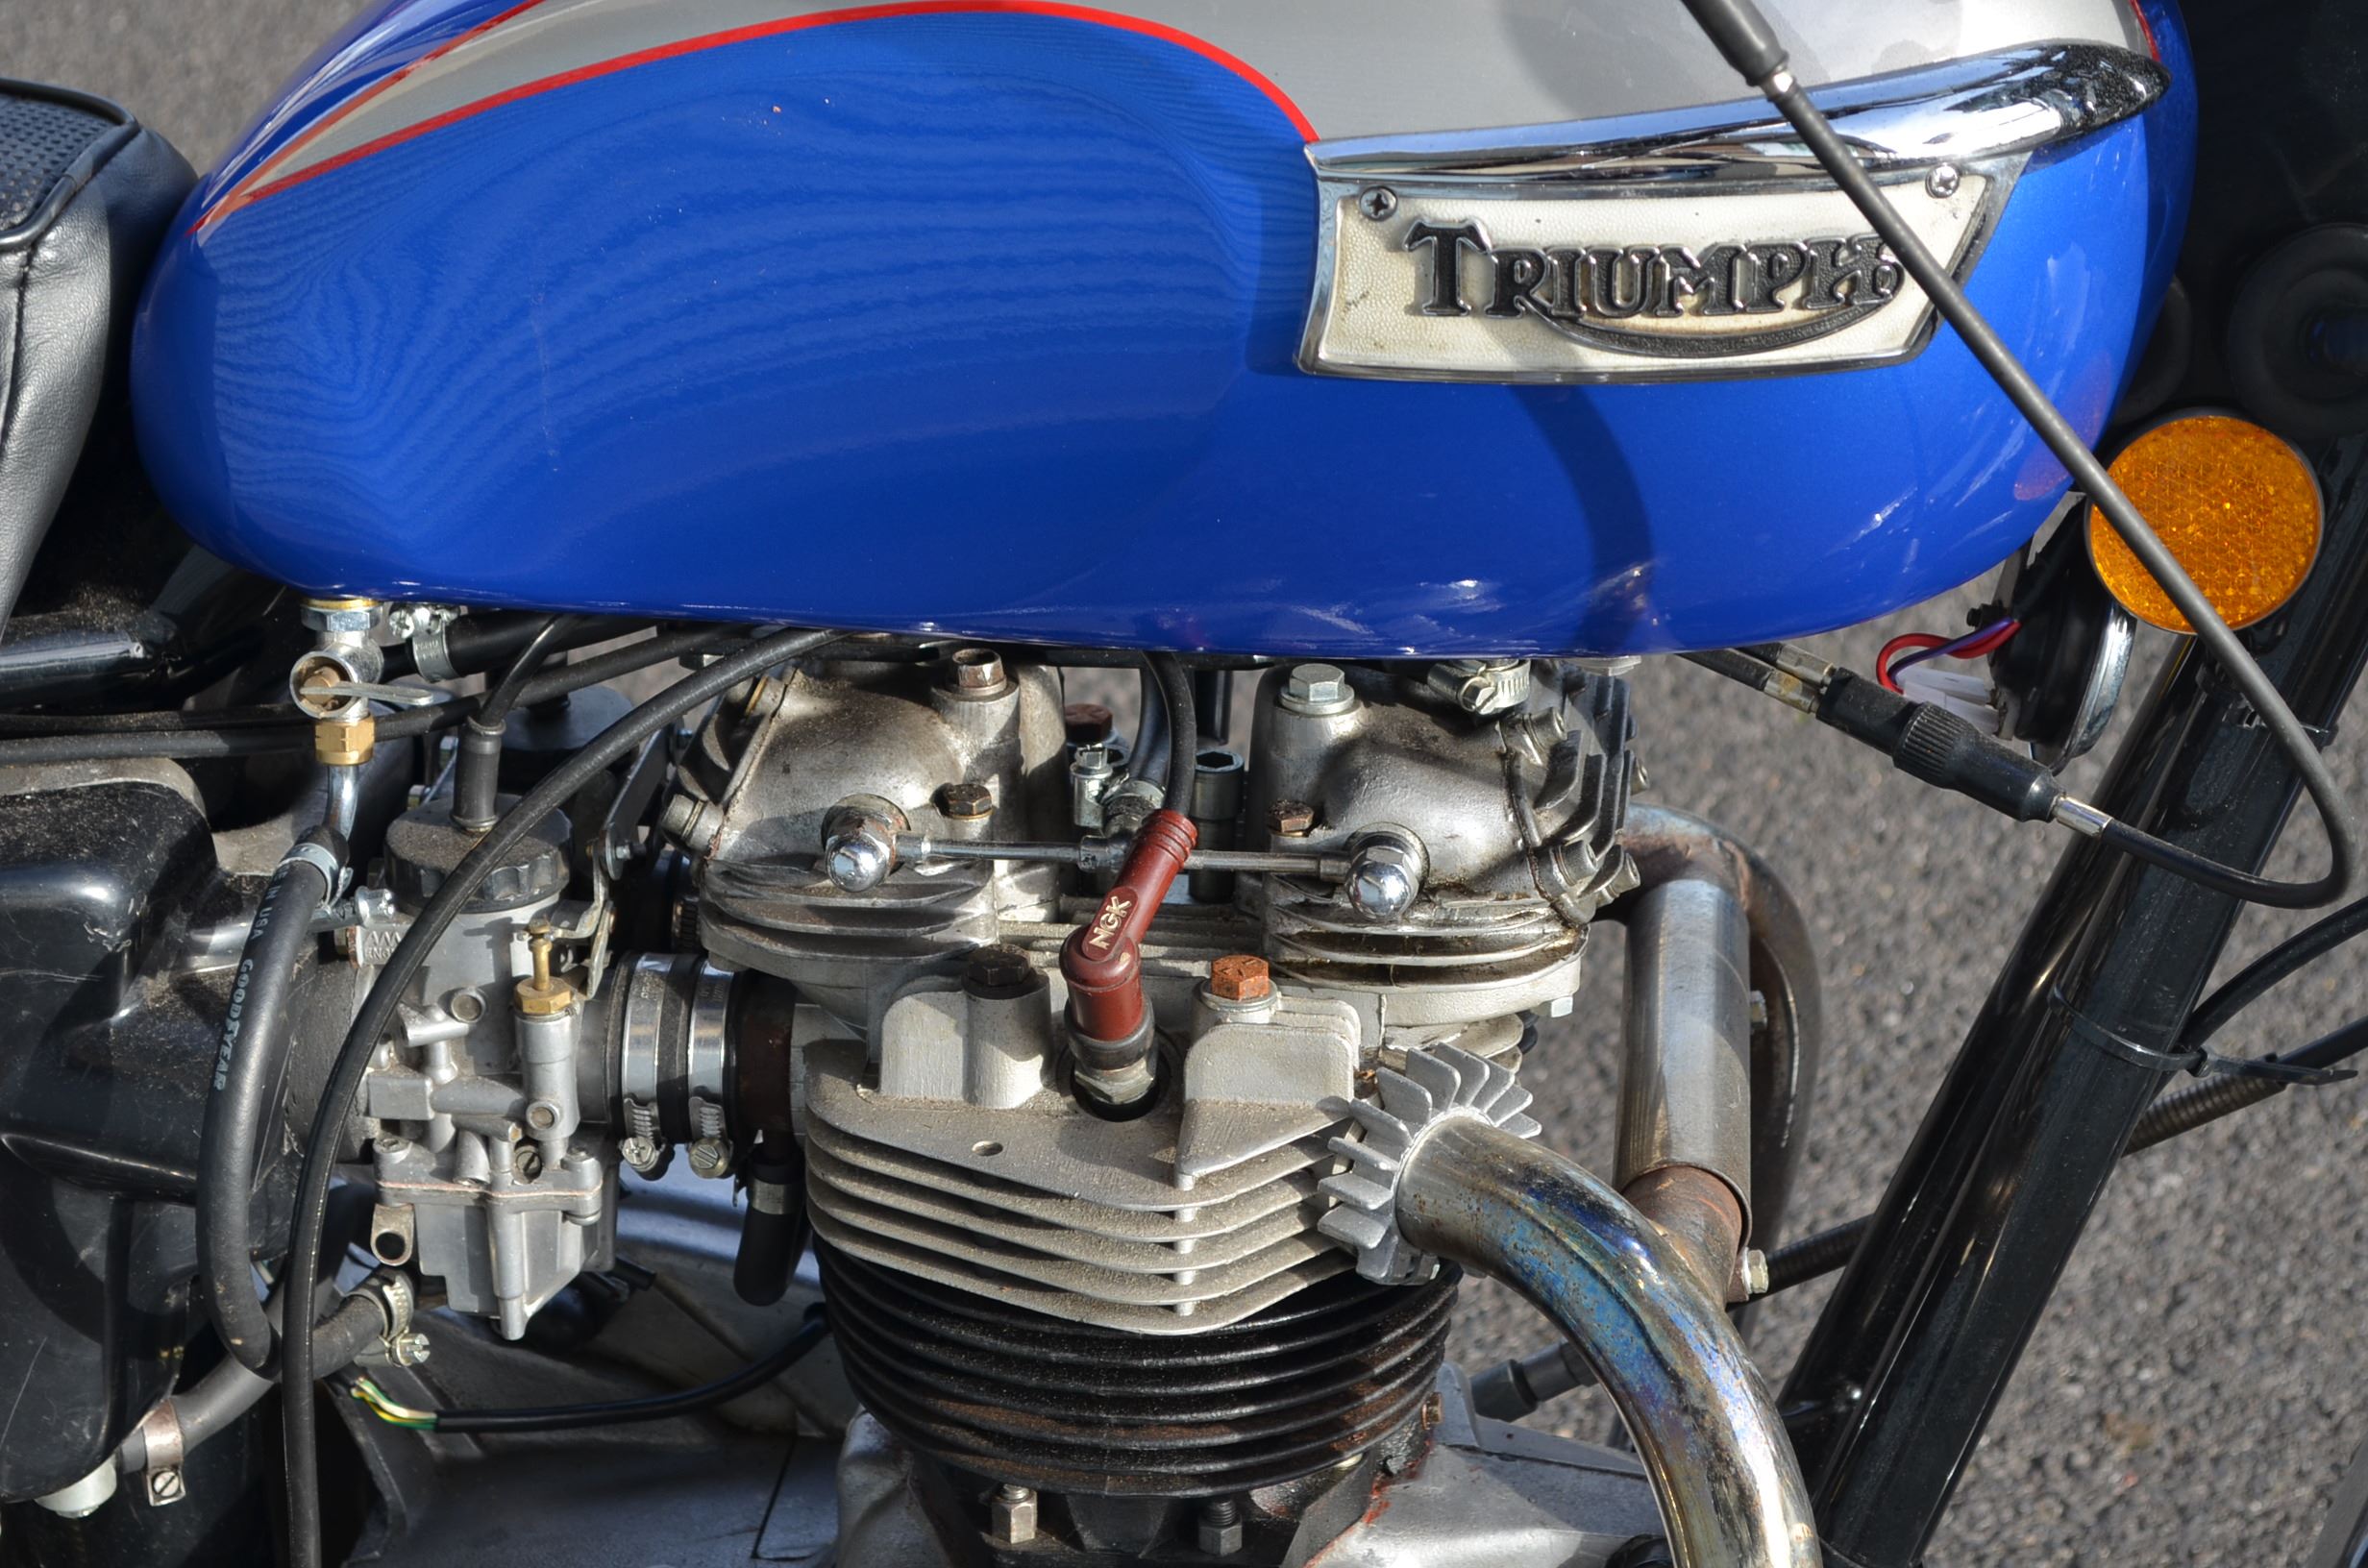 Triumph bonneville customised with later parts dnhsgv8dufx5ypfh xr8b